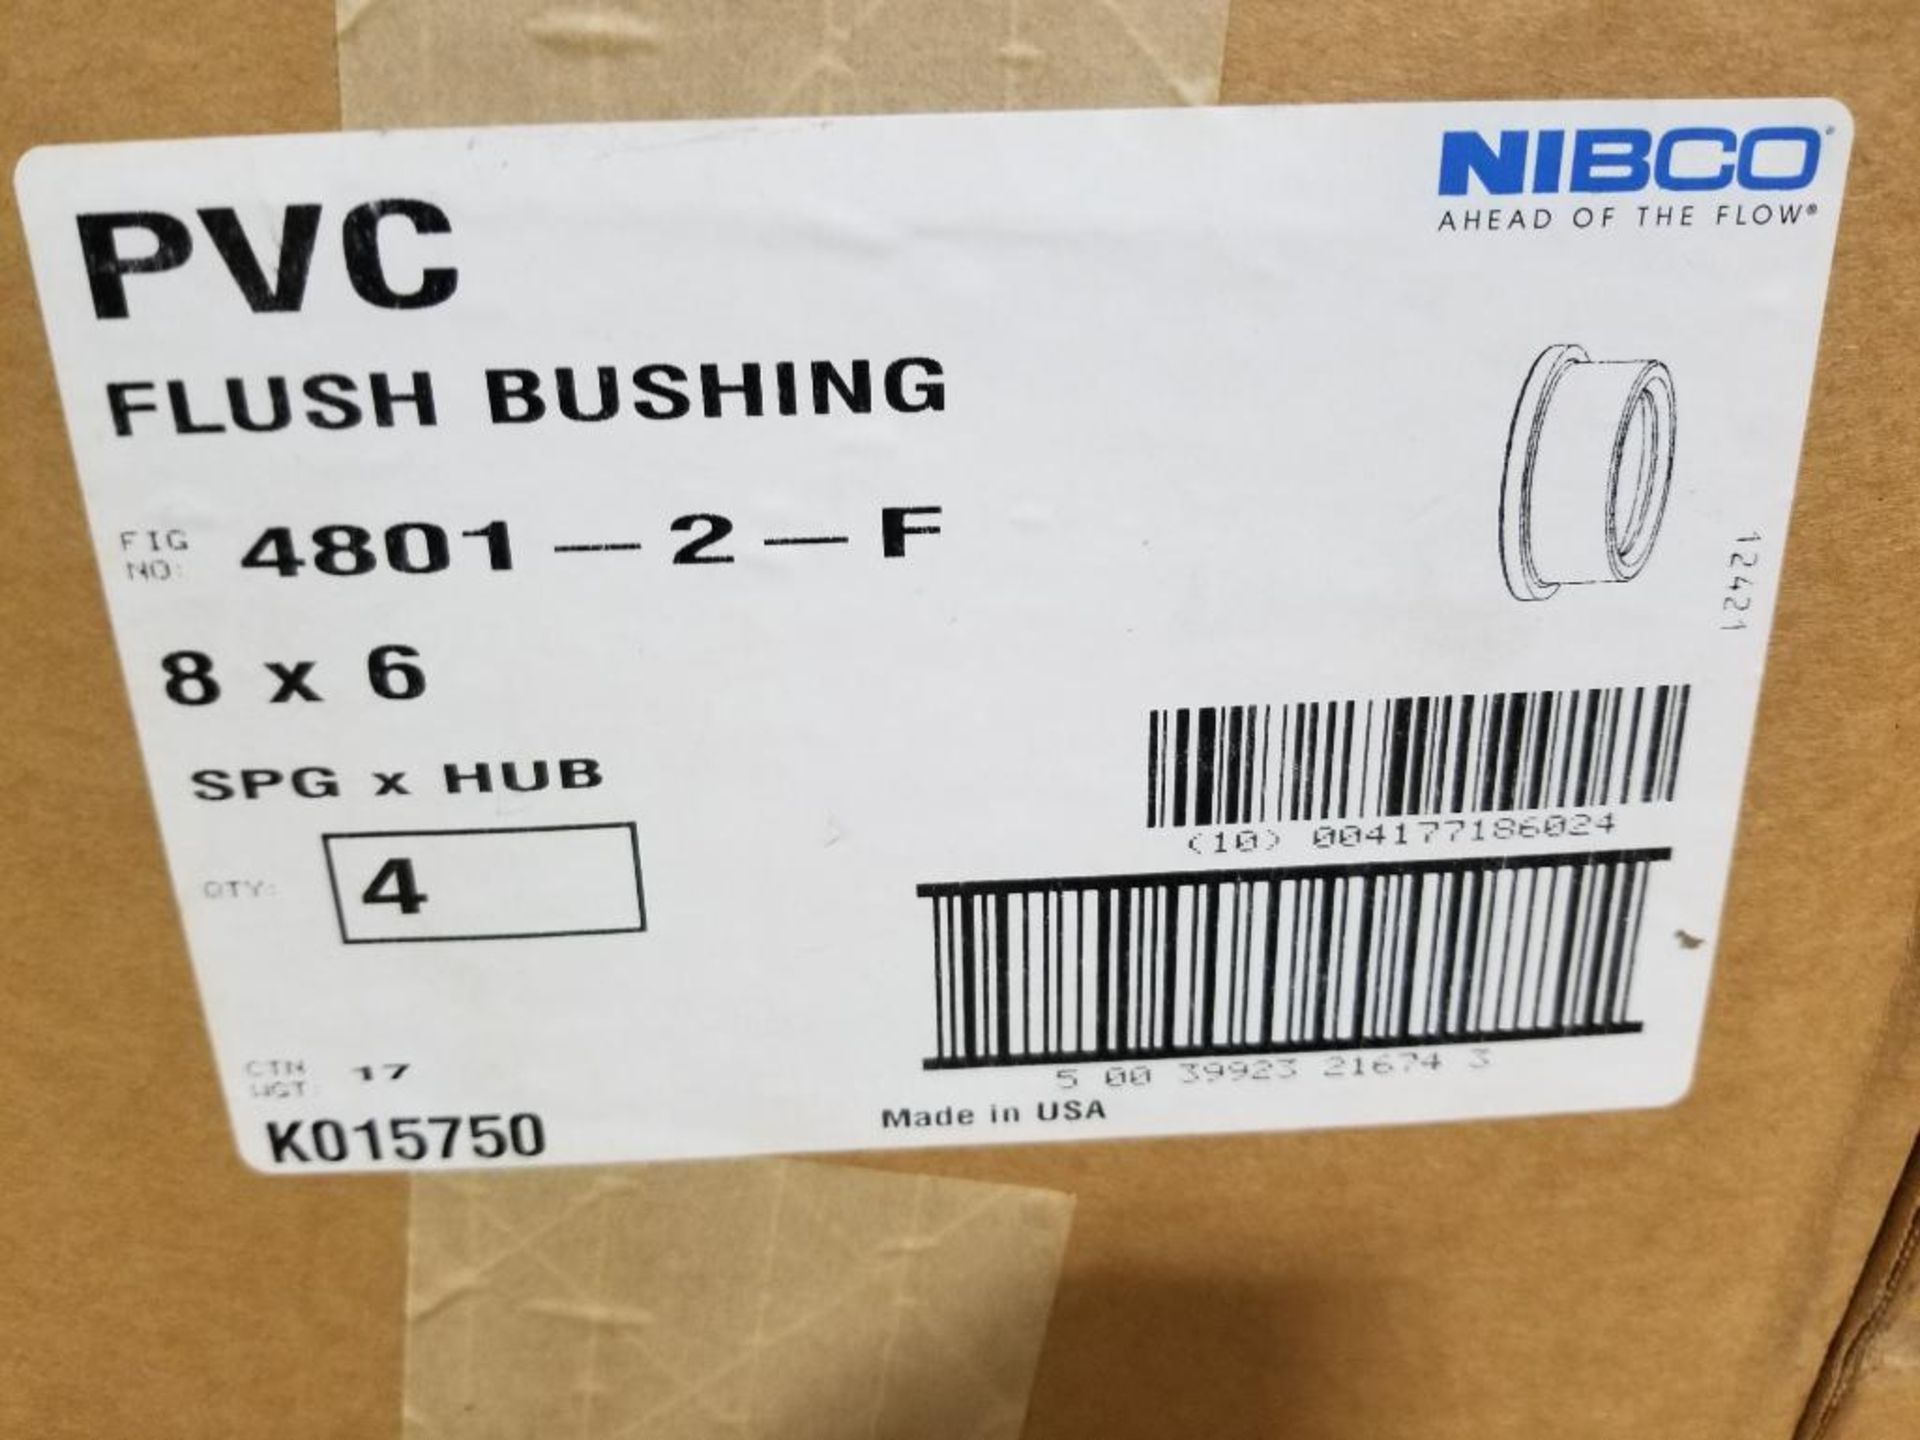 Qty 16 - Nibco flush bushings. Part number 4801-2-F. (4 boxes of 4) - Image 2 of 2